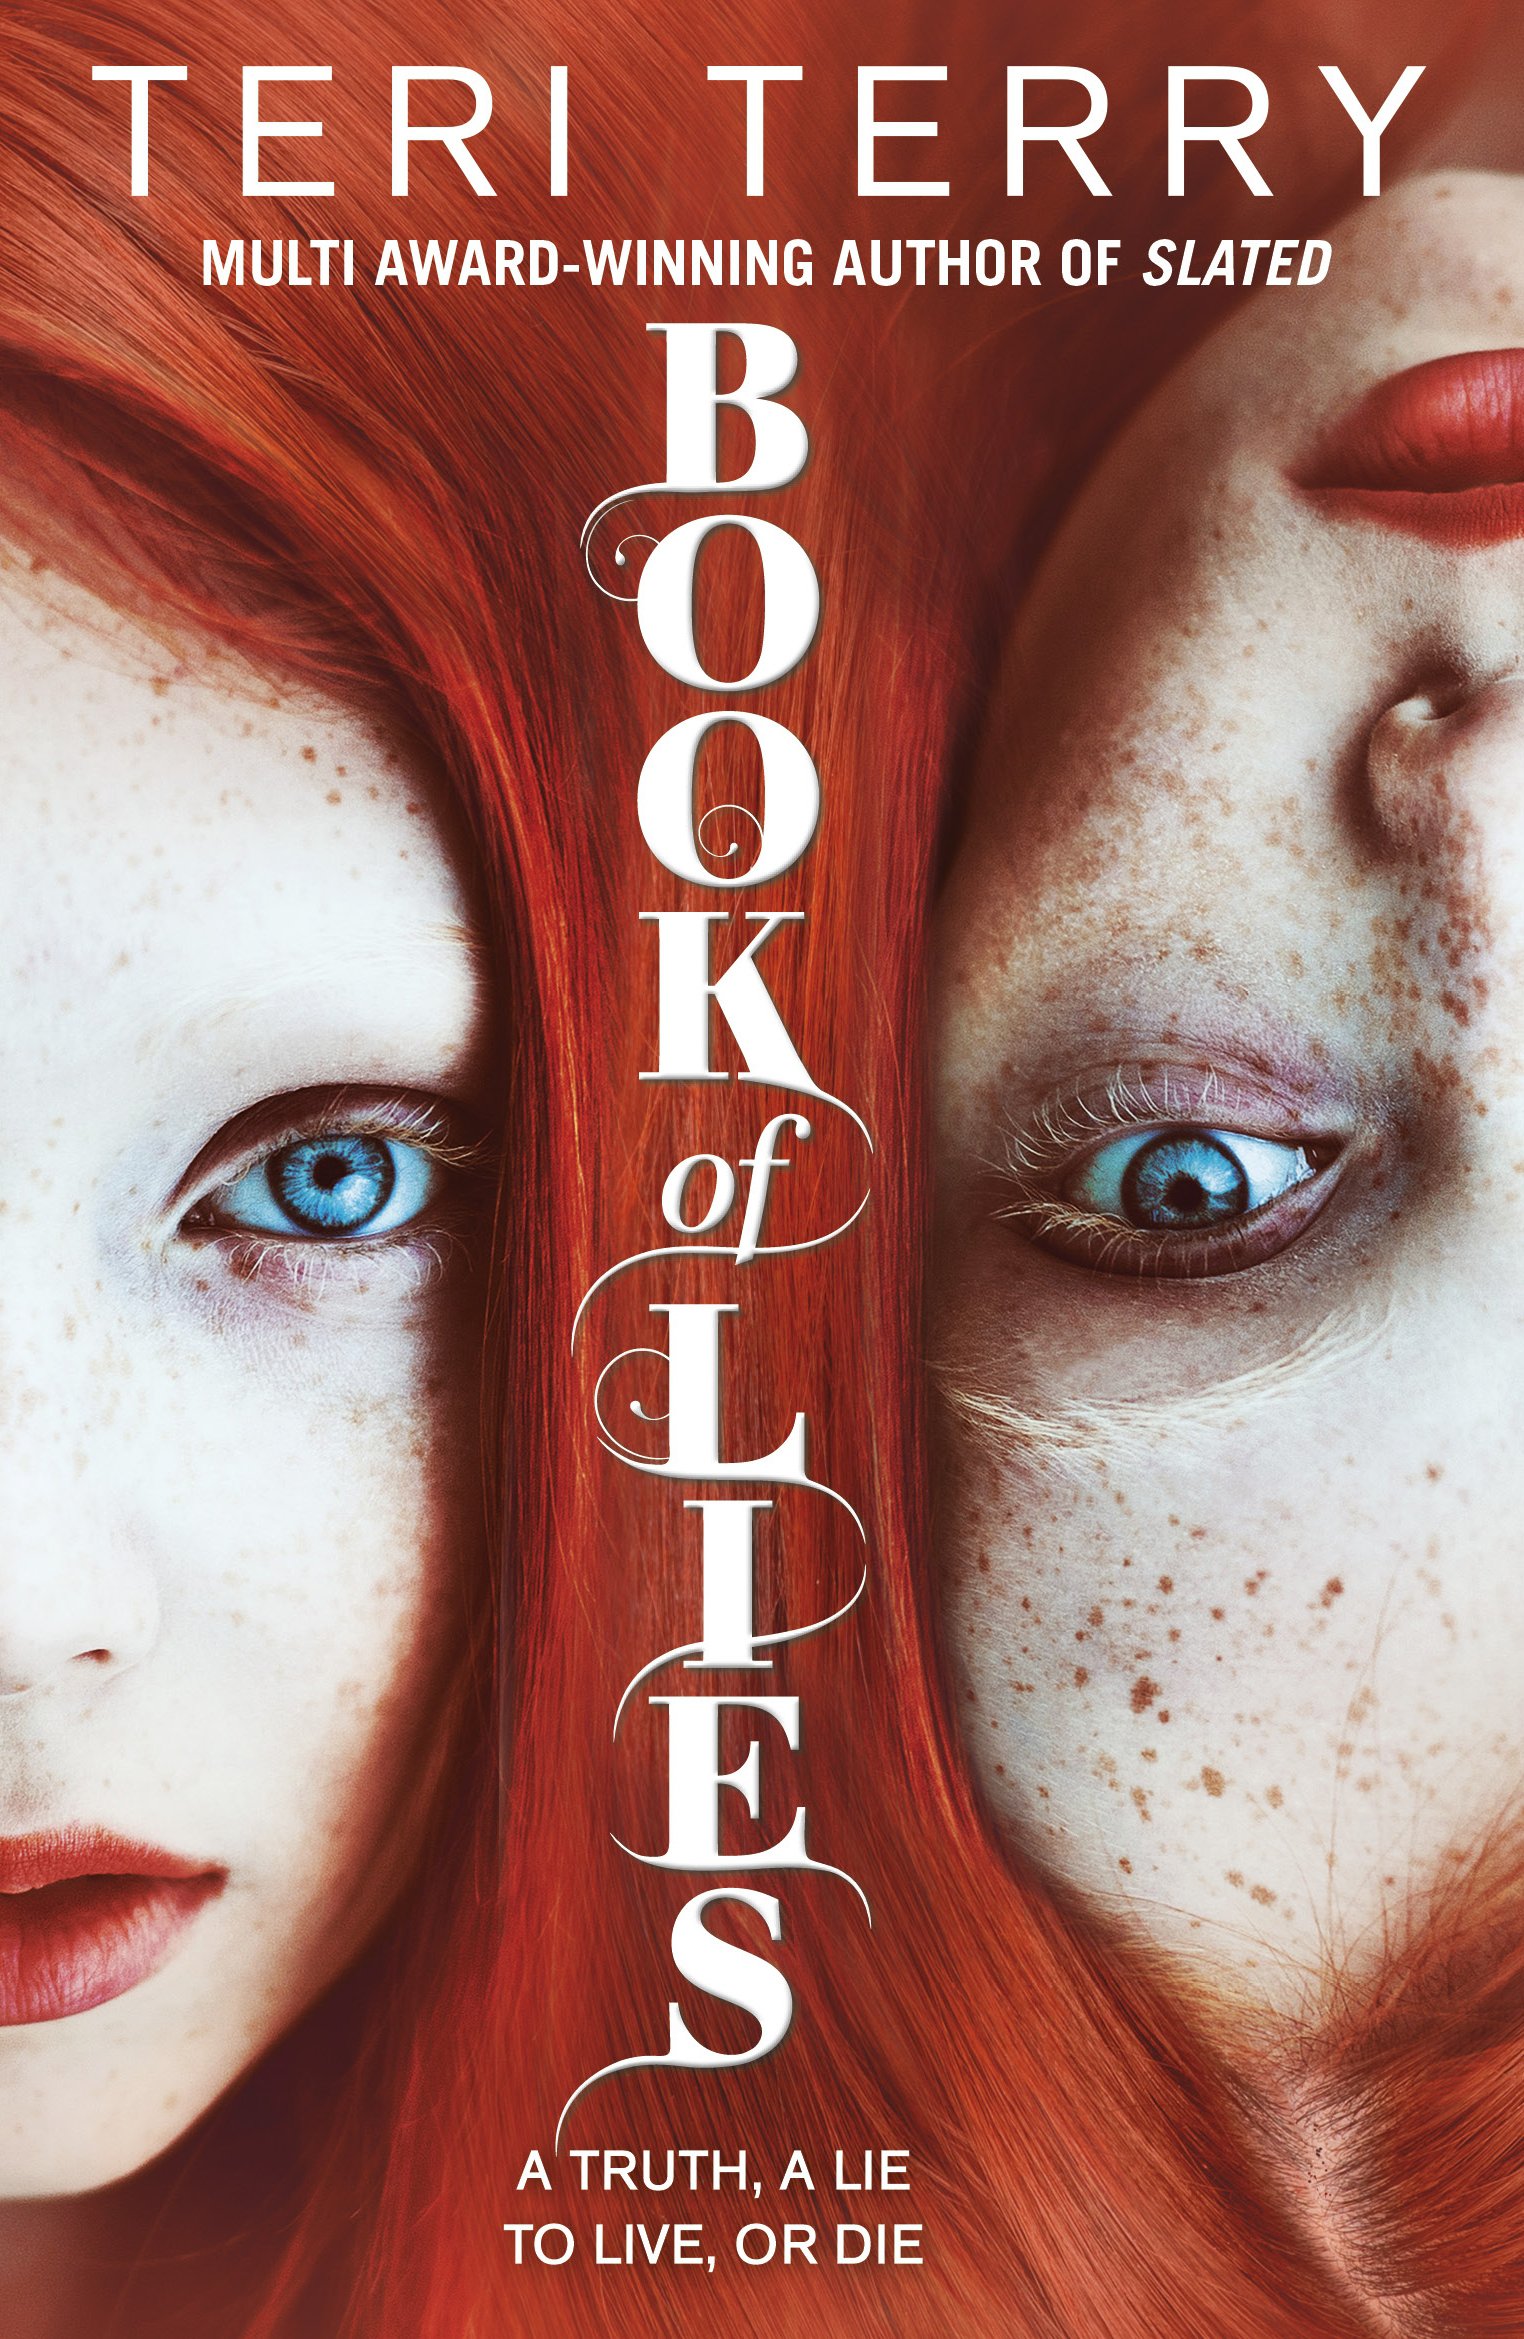 BOOK OF LIES BY TERI TERRY BOOK REVIEW